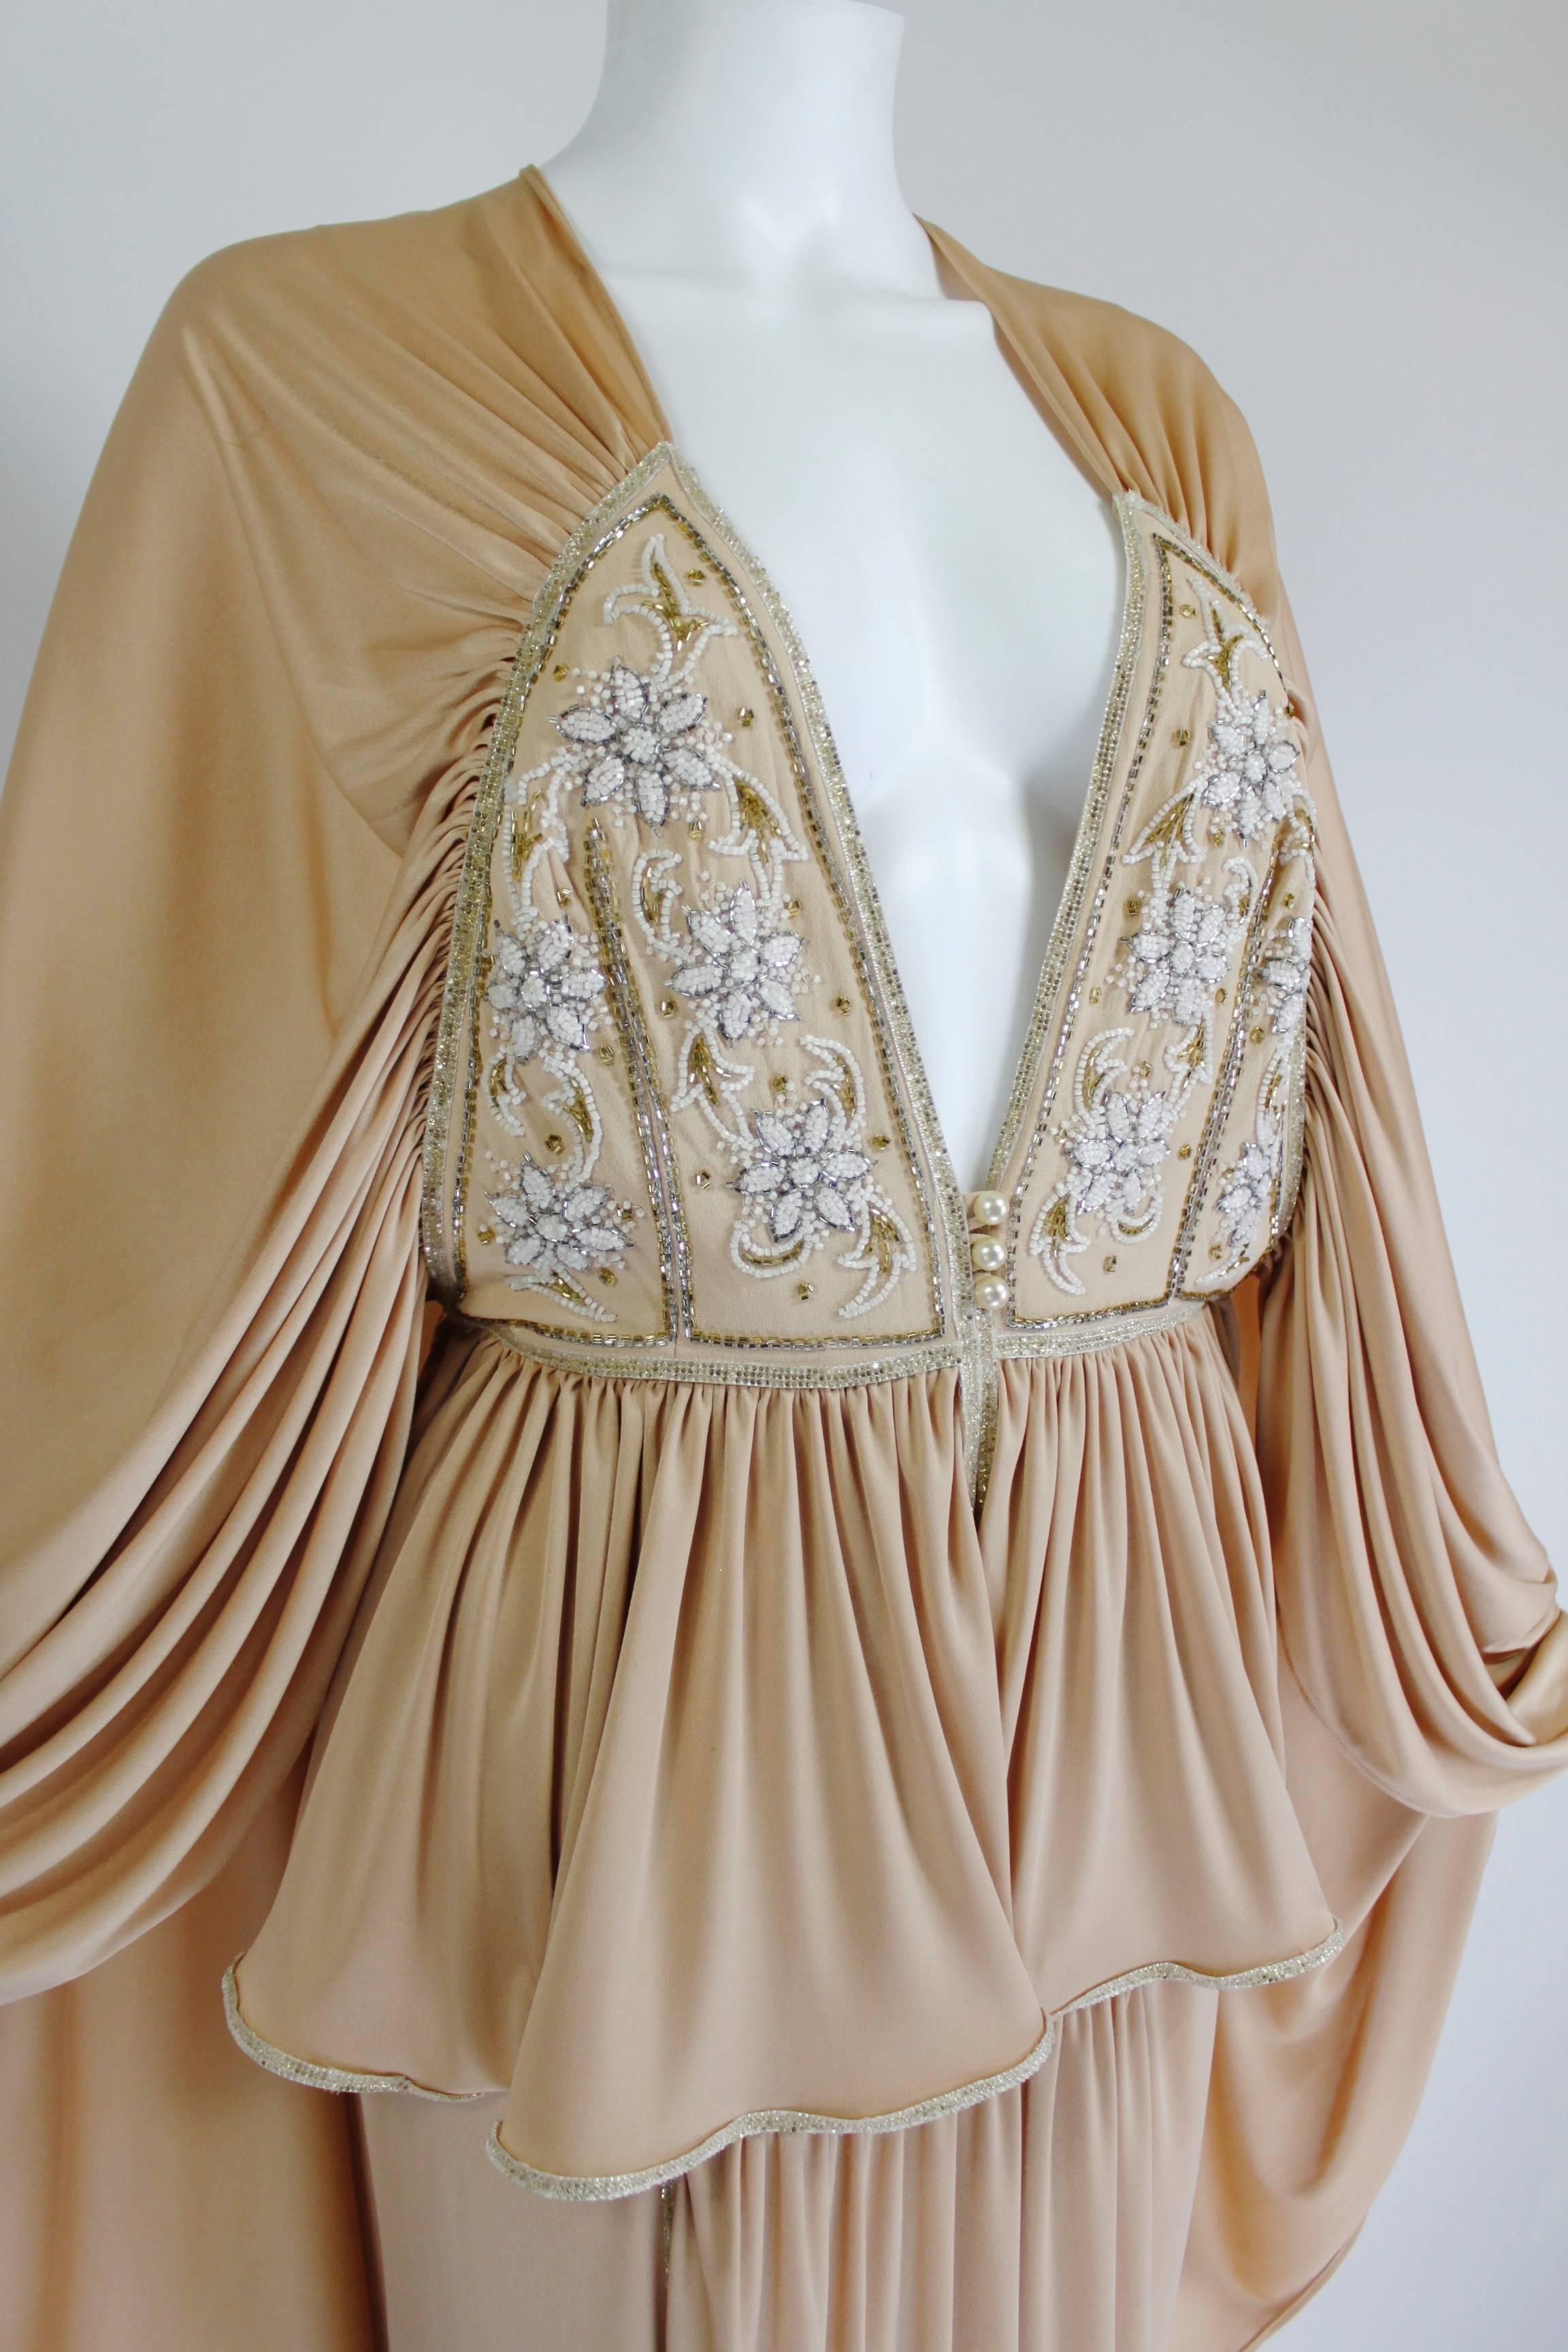 1970s Bill Gibb Ethereal Gown with Floral Beading and Plunging Neckline 1